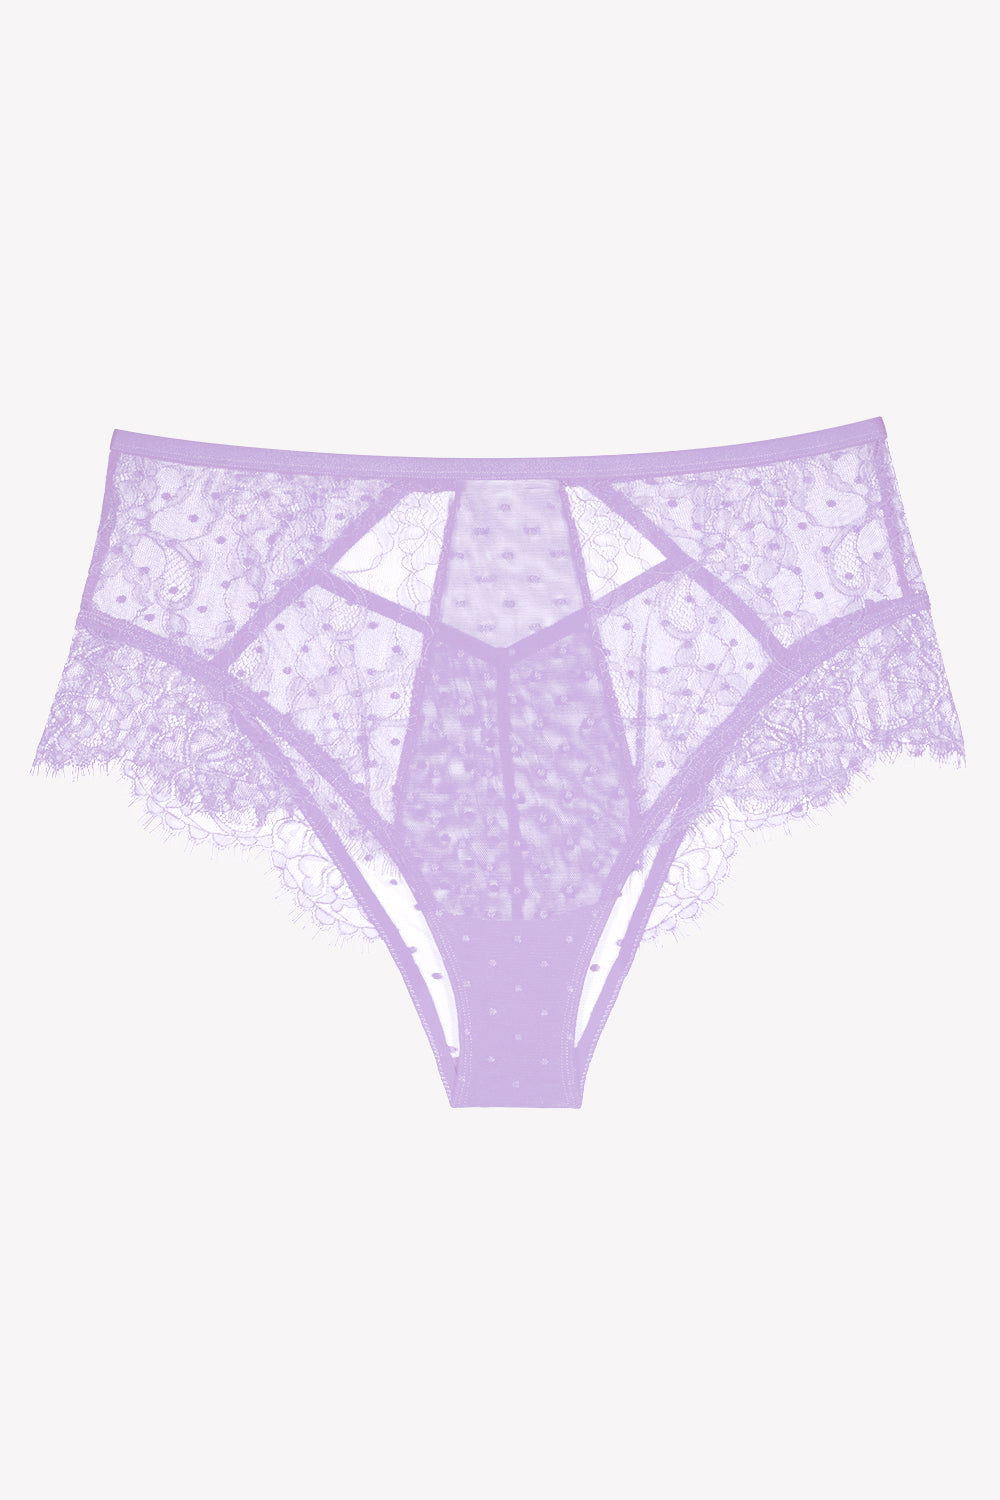 Lace High-Waisted Cheeky Panty